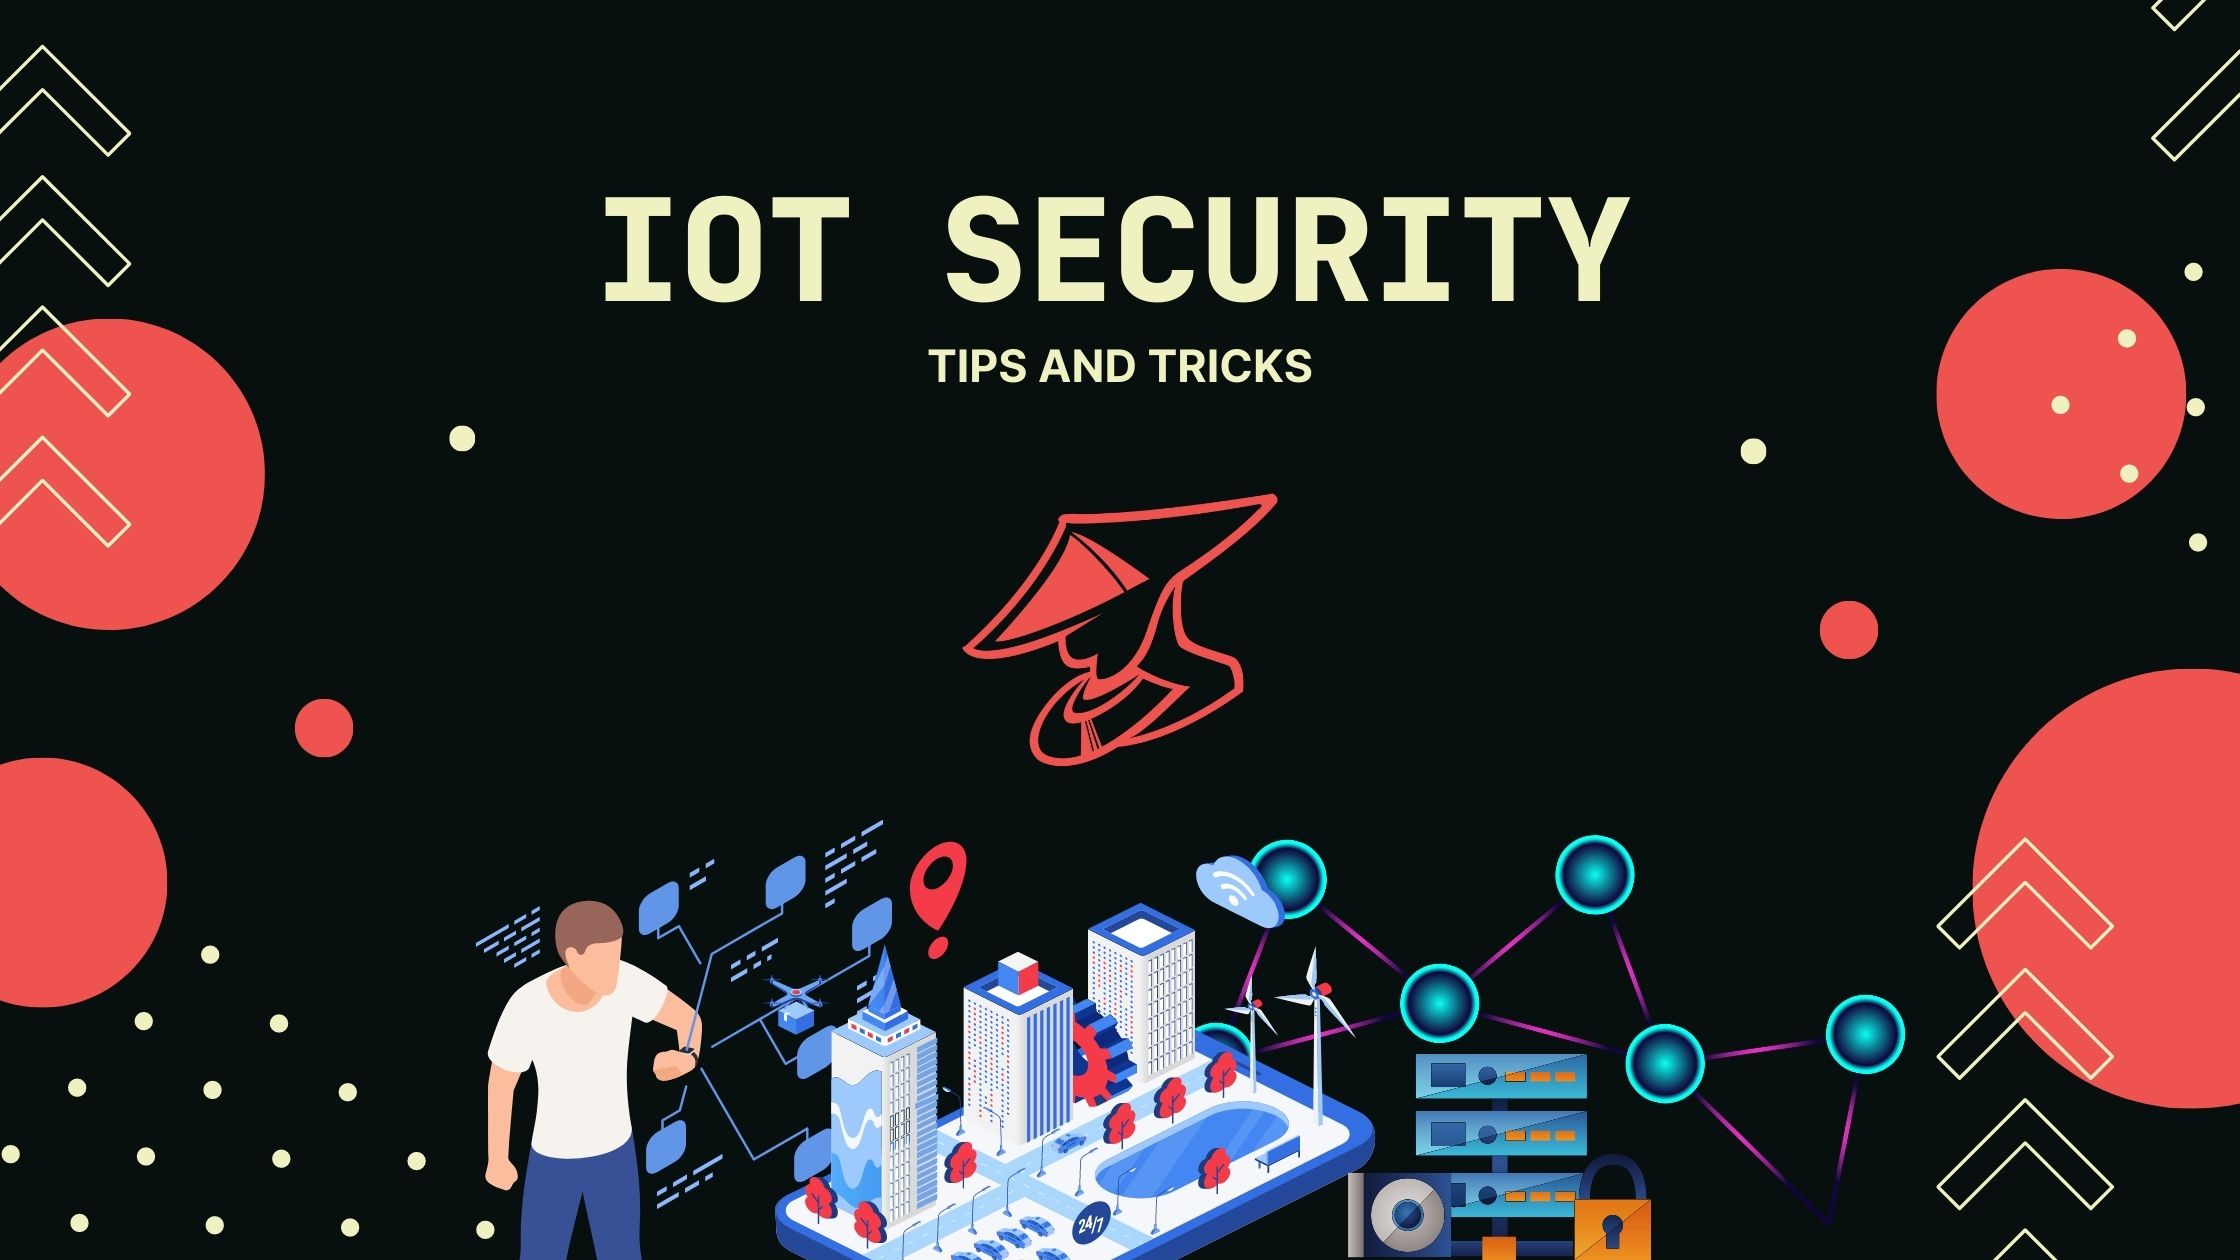 Ronin-Pentest | IoT Security - best practices and tips